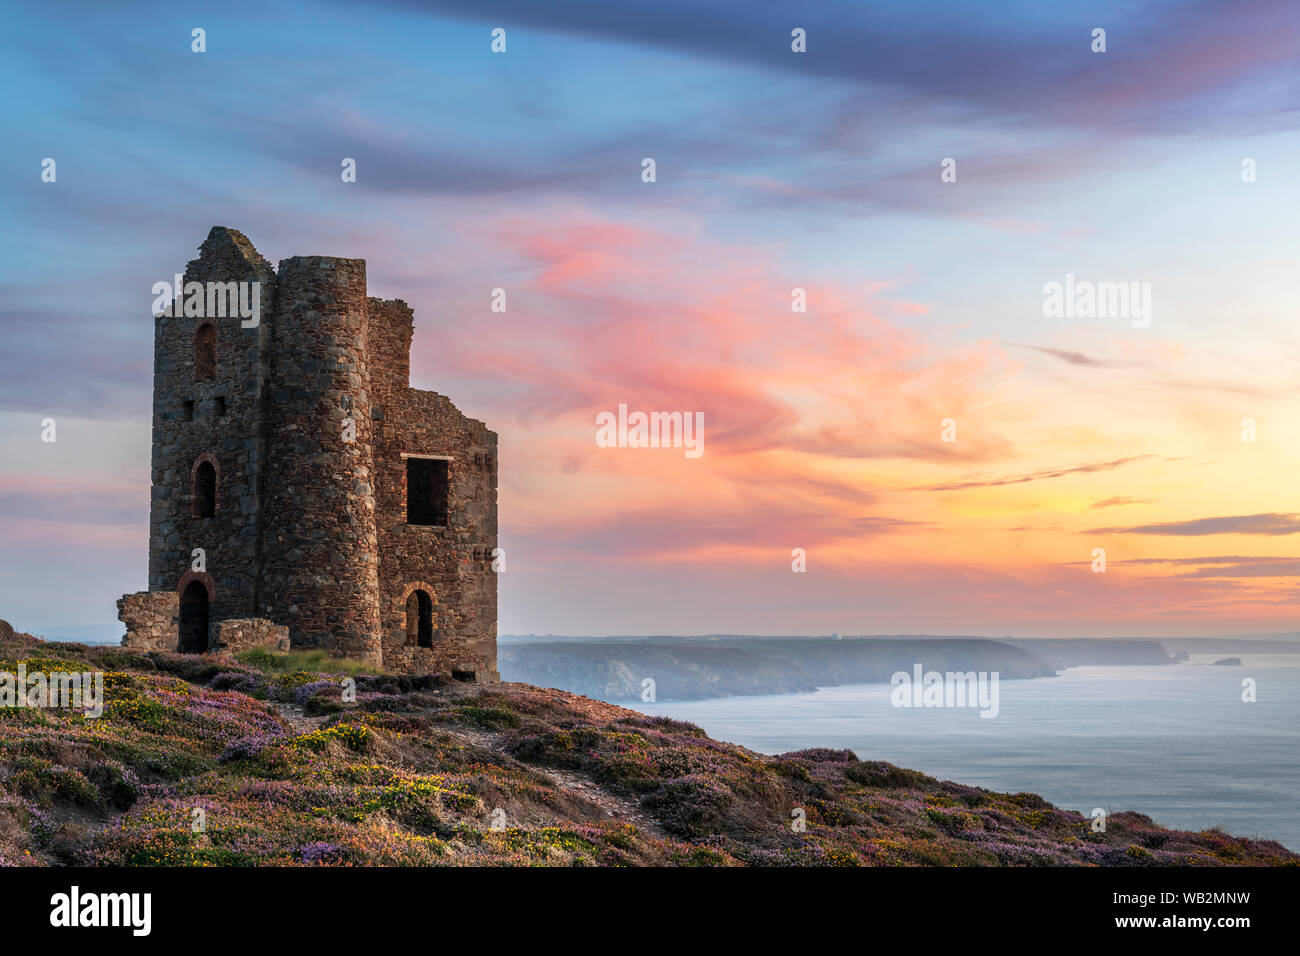 Wheal Coates, near St. Agnes in North Cornwall, England. Monday 23rd August 2019. UK Weather. After a hot and sunny day in Cornwall the wind picks up as the sun sets over Wheal Coates at St. Agnes Beacon at the start of the August Bank Holiday weekend, forecast to be one of the hottest on record; avid fans of the popular BBC One series Poldark will recognise the spectacular scenery as they eagerly await the concluding episodes in the last ever series, screening this Sunday and Monday. Credit: Terry Mathews/Alamy Live News Stock Photo